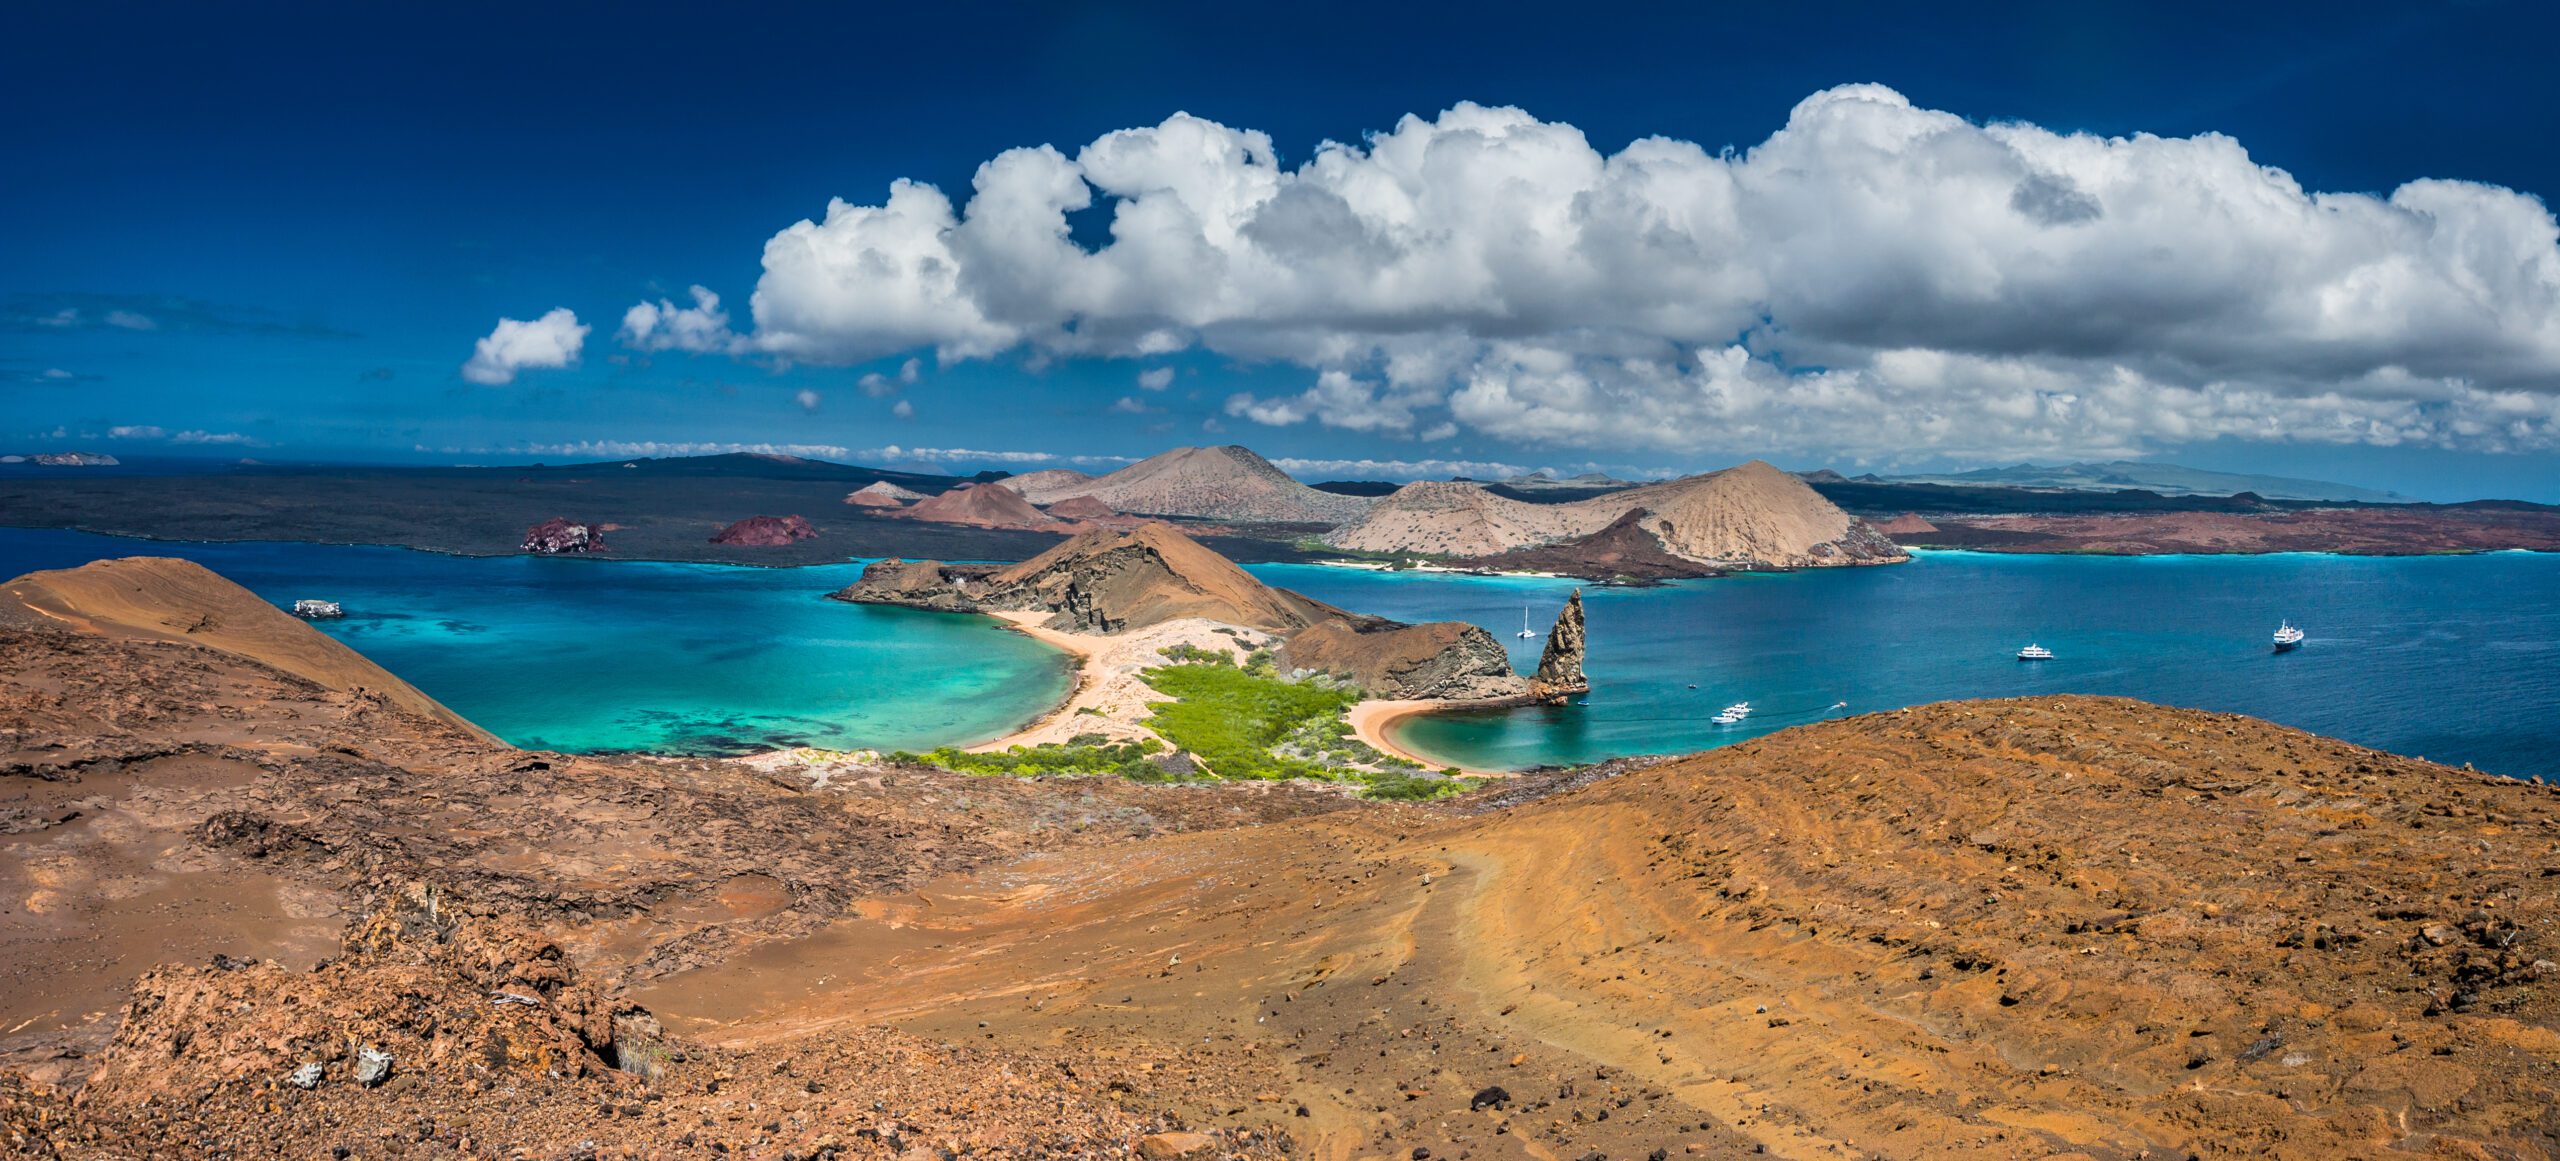 Expansive shot of the a Galapagos Island